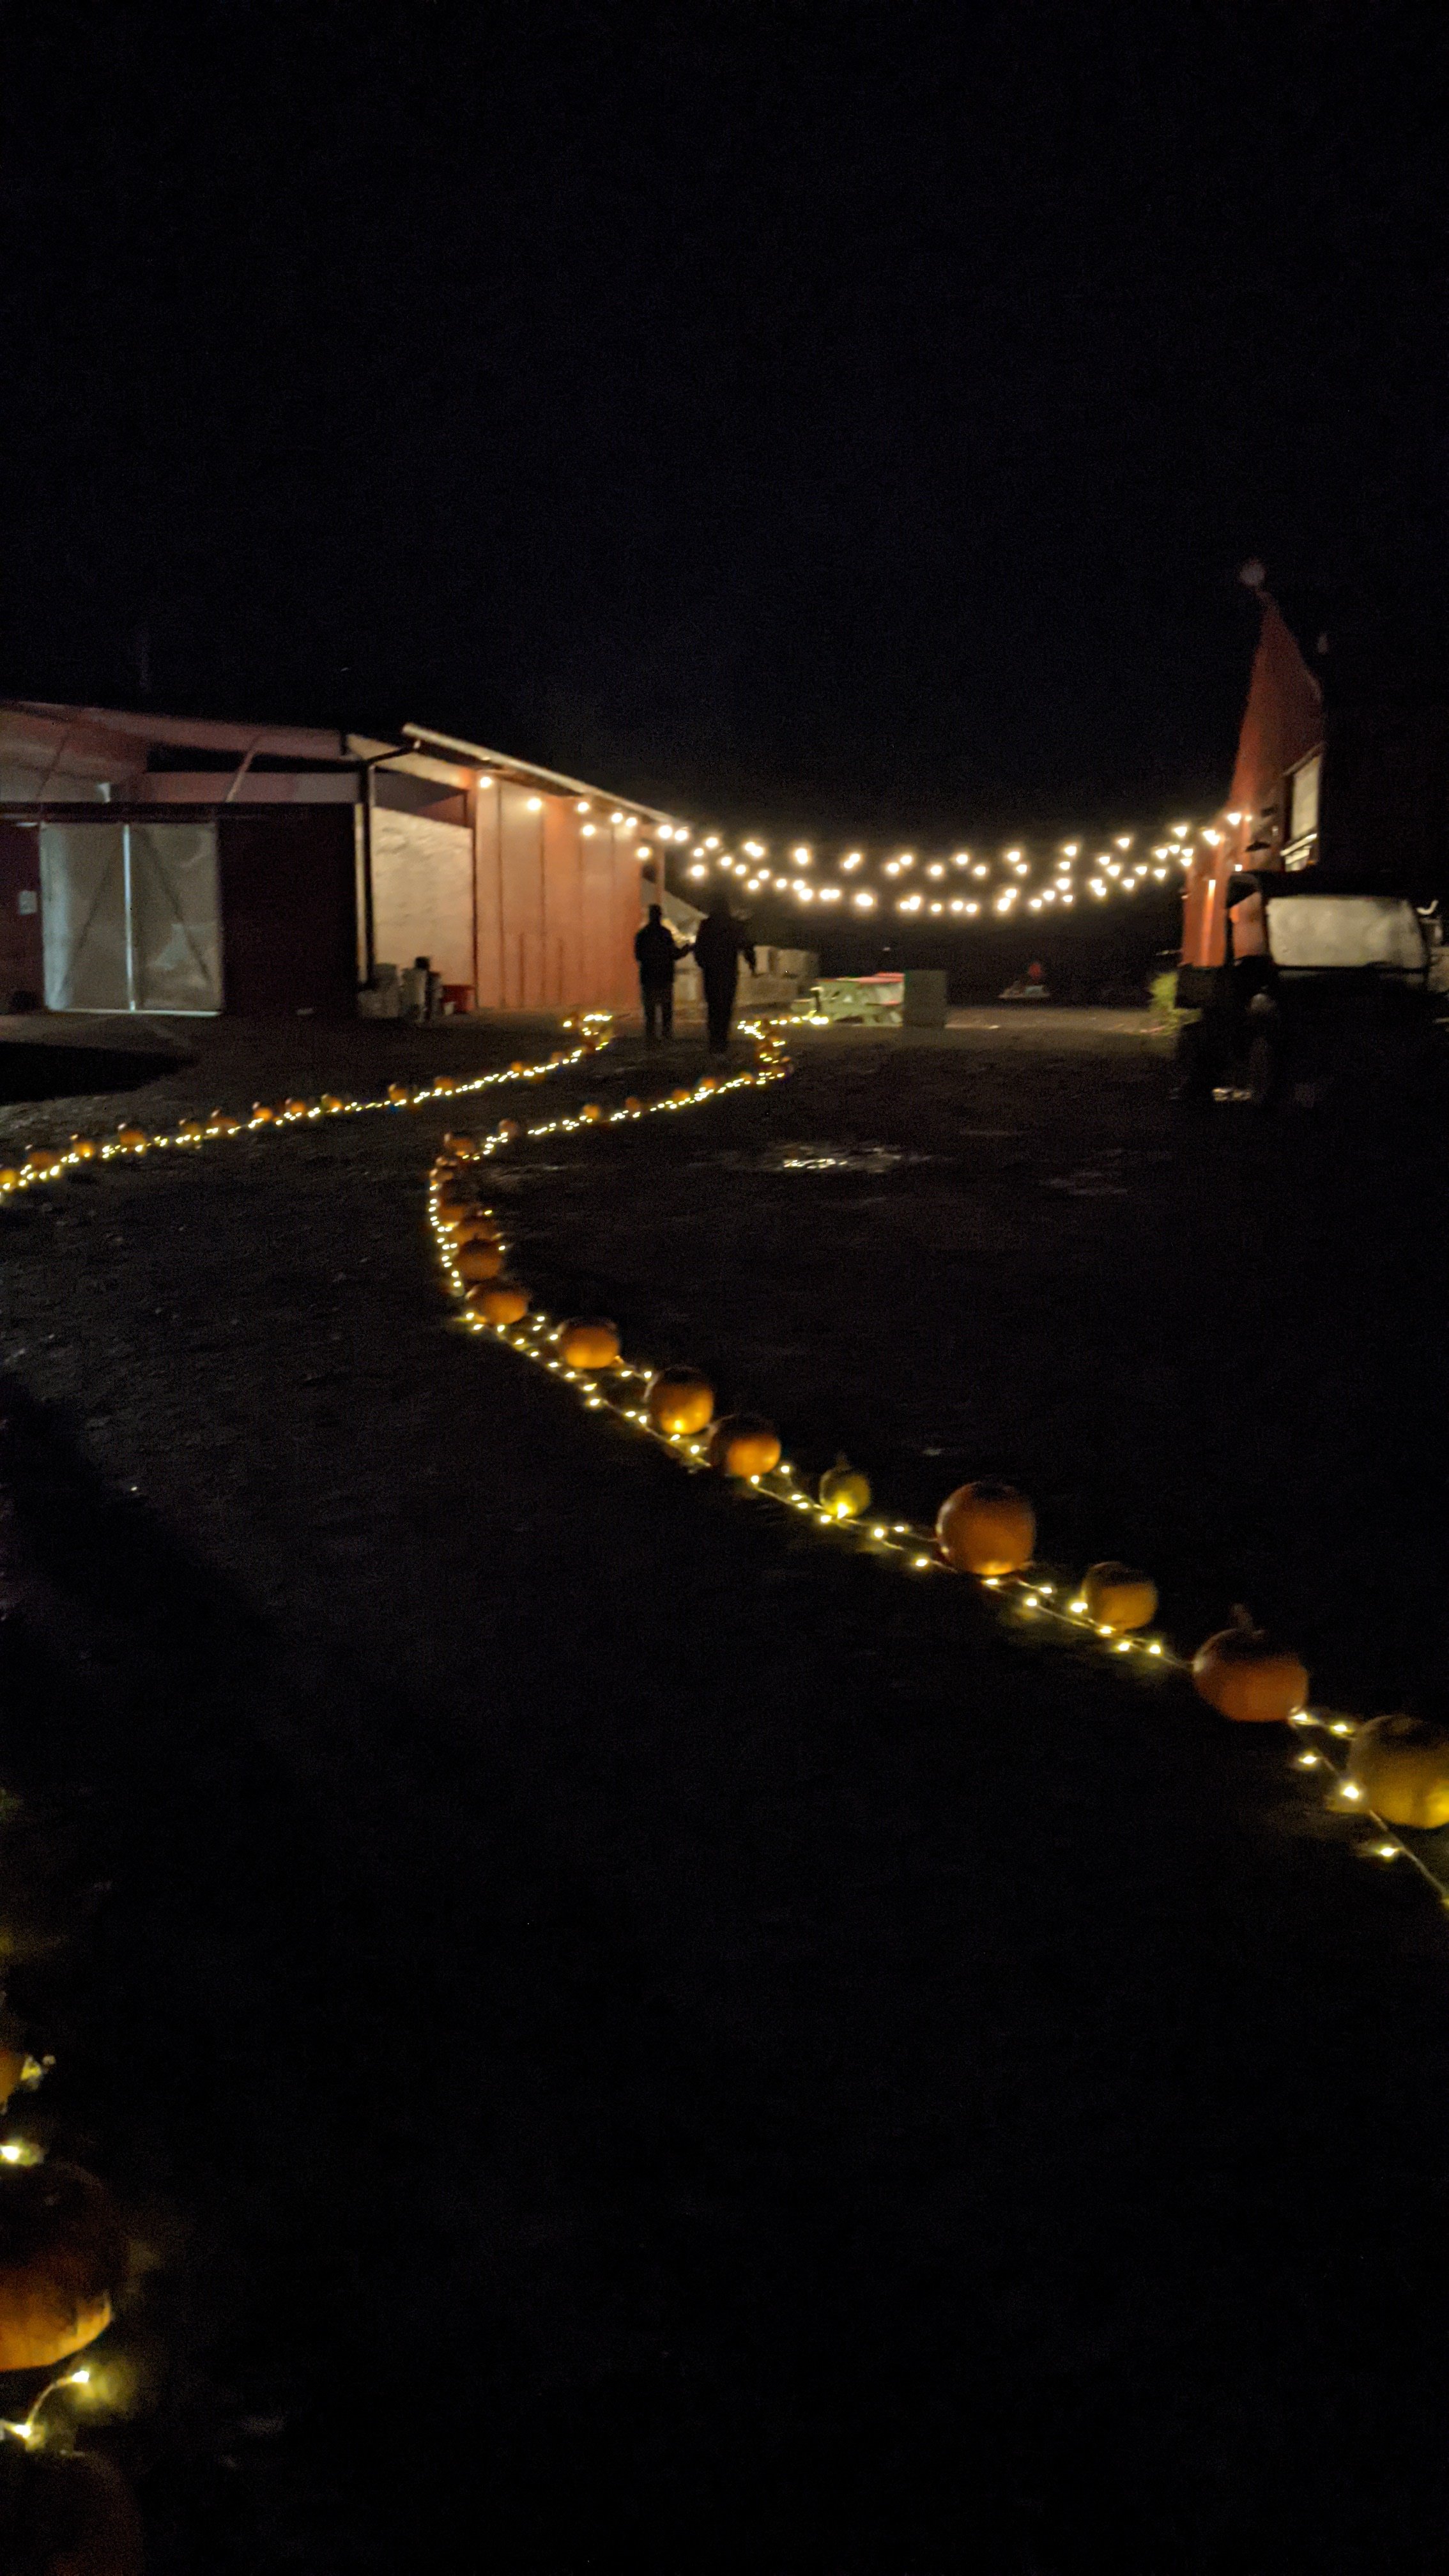  I wish we had taken more photos. The entire farm looked magical with all the lights. 